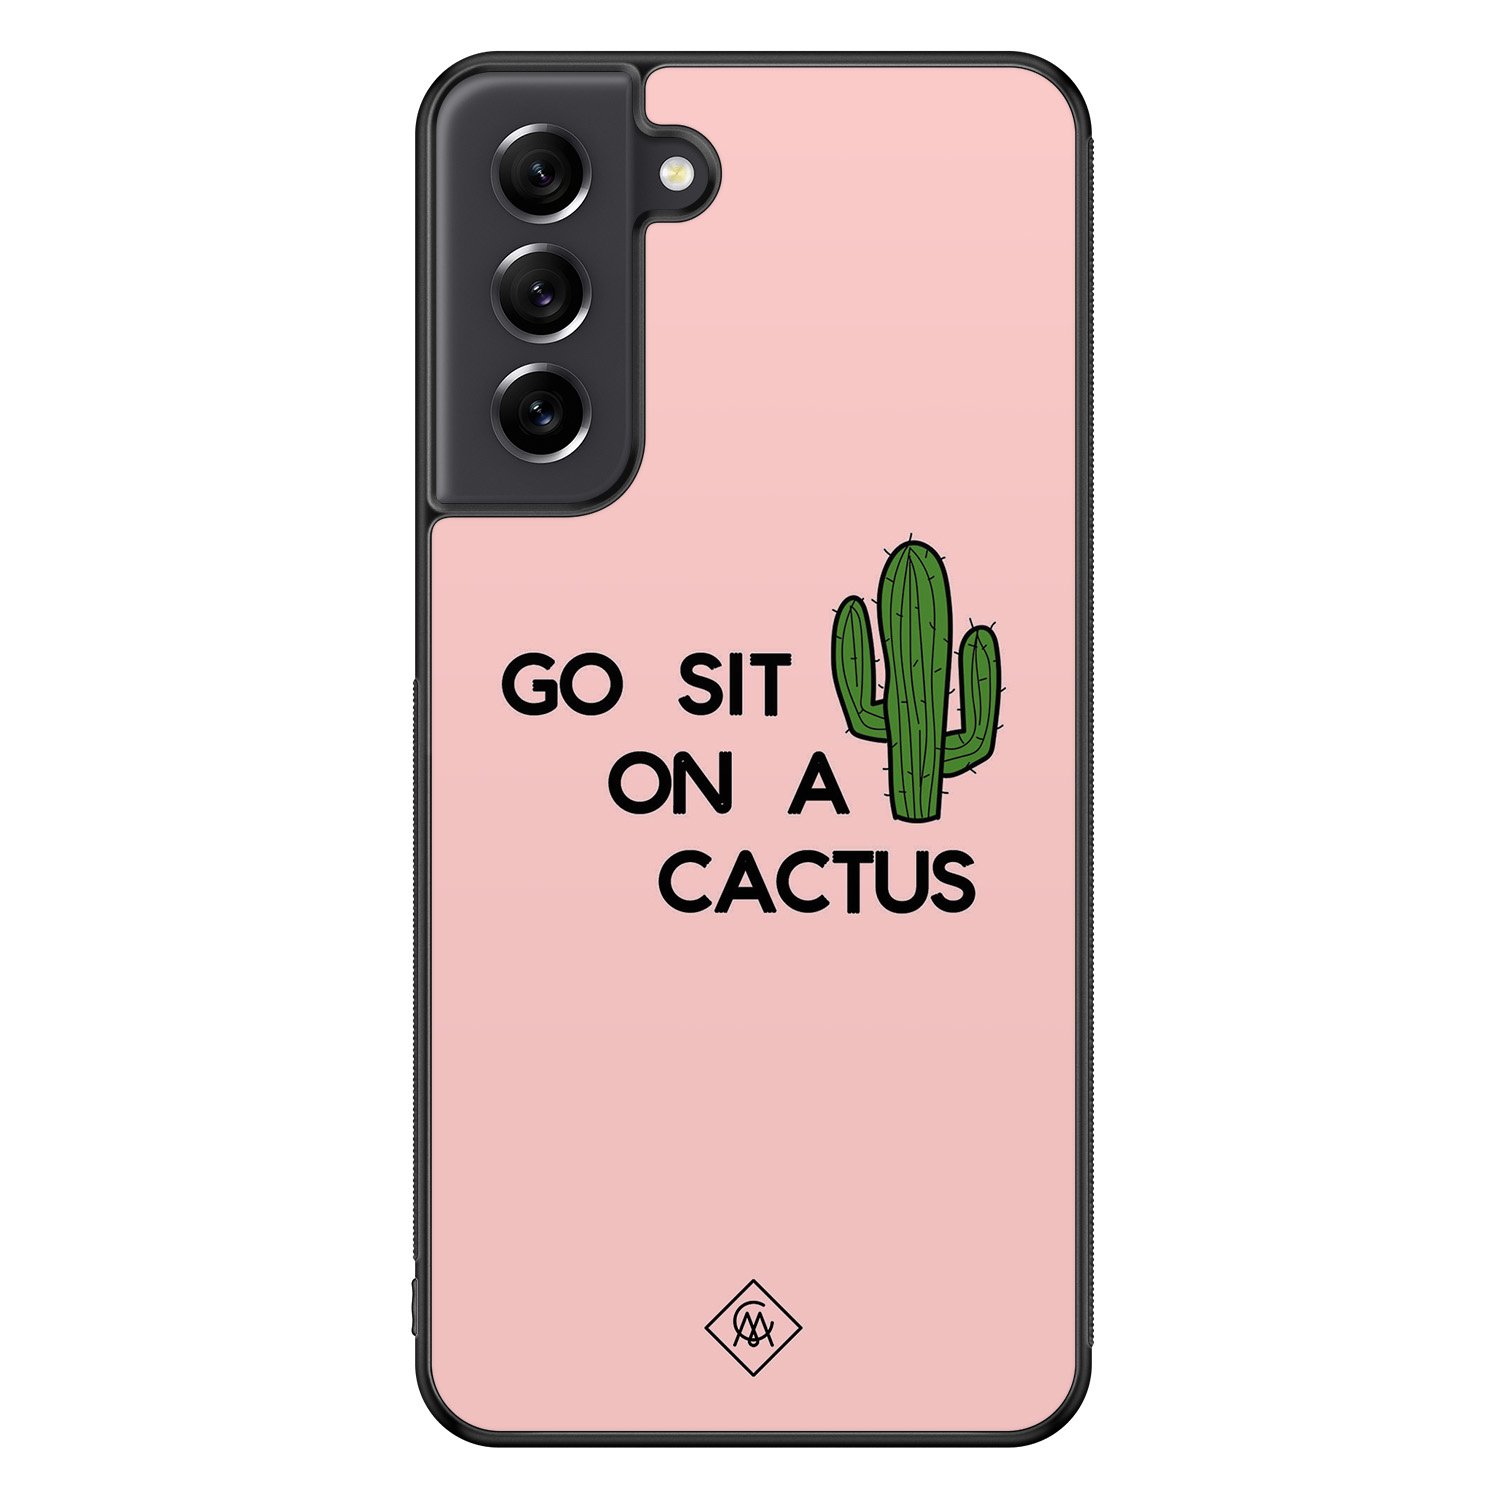 Samsung Galaxy S21 FE hoesje - Go sit on a cactus